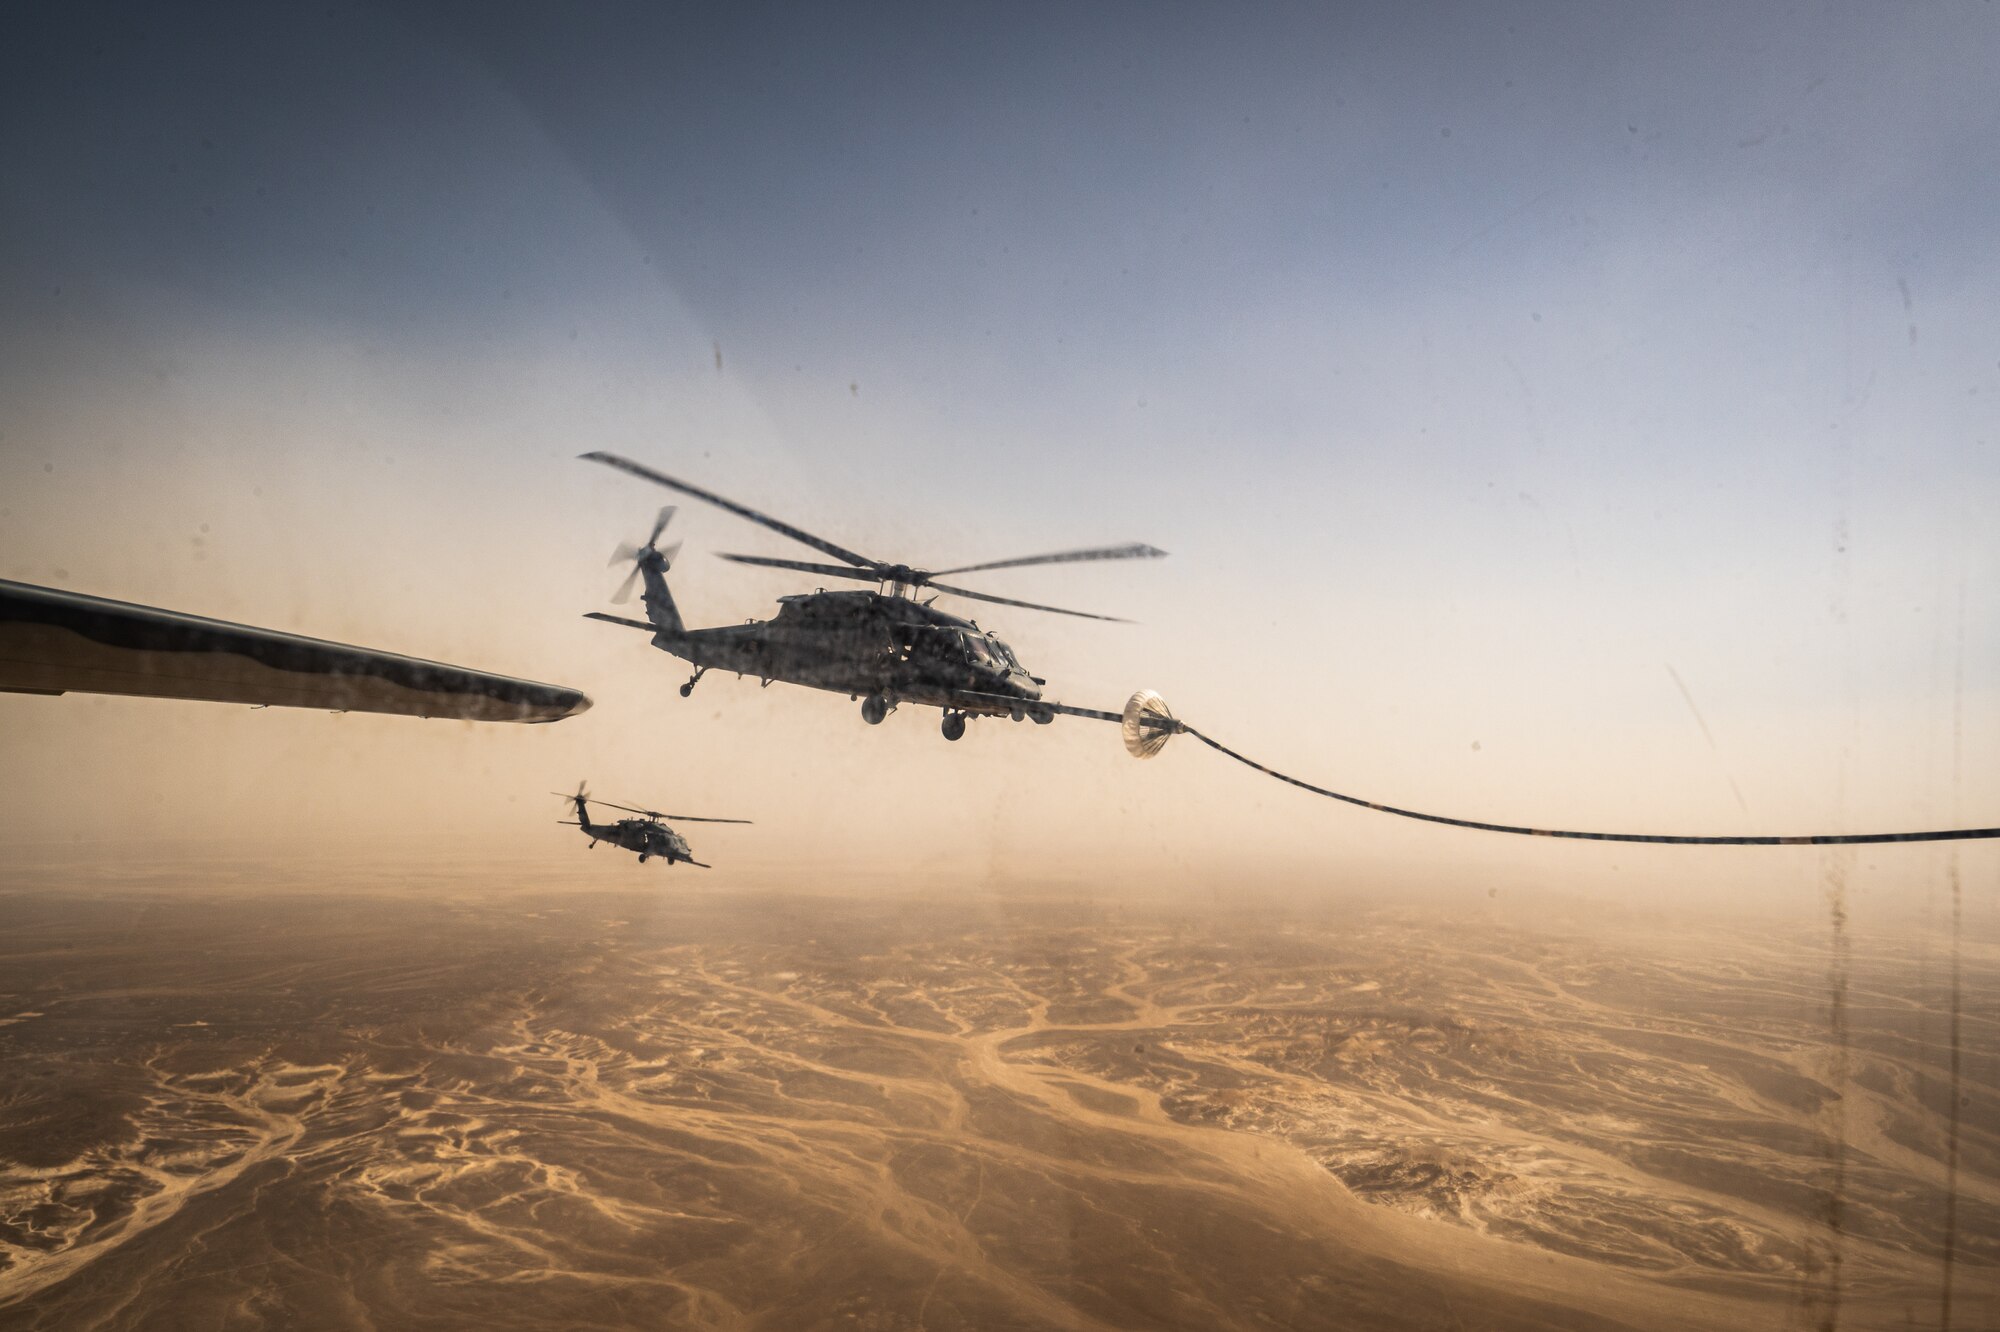 A 332d Air Expeditionary Wing HH-60G Pave Hawk helicopter receives fuel from an HC-130J Combat King II aircraft, also assigned to the 332d AEW, in Southwest Asia June 12, 2022. The primary mission of the Pave Hawk is to conduct day or night personnel recovery operations into hostile environments to recover isolated personnel during conflict. The HH-60G is also tasked to perform military operations other than conflict, including civil search and rescue, medical evacuation, disaster response, humanitarian assistance, security cooperation/aviation advisory, NASA space flight support, and rescue command and control. (U.S. Air Force photo by Master Sgt. Christopher Parr)